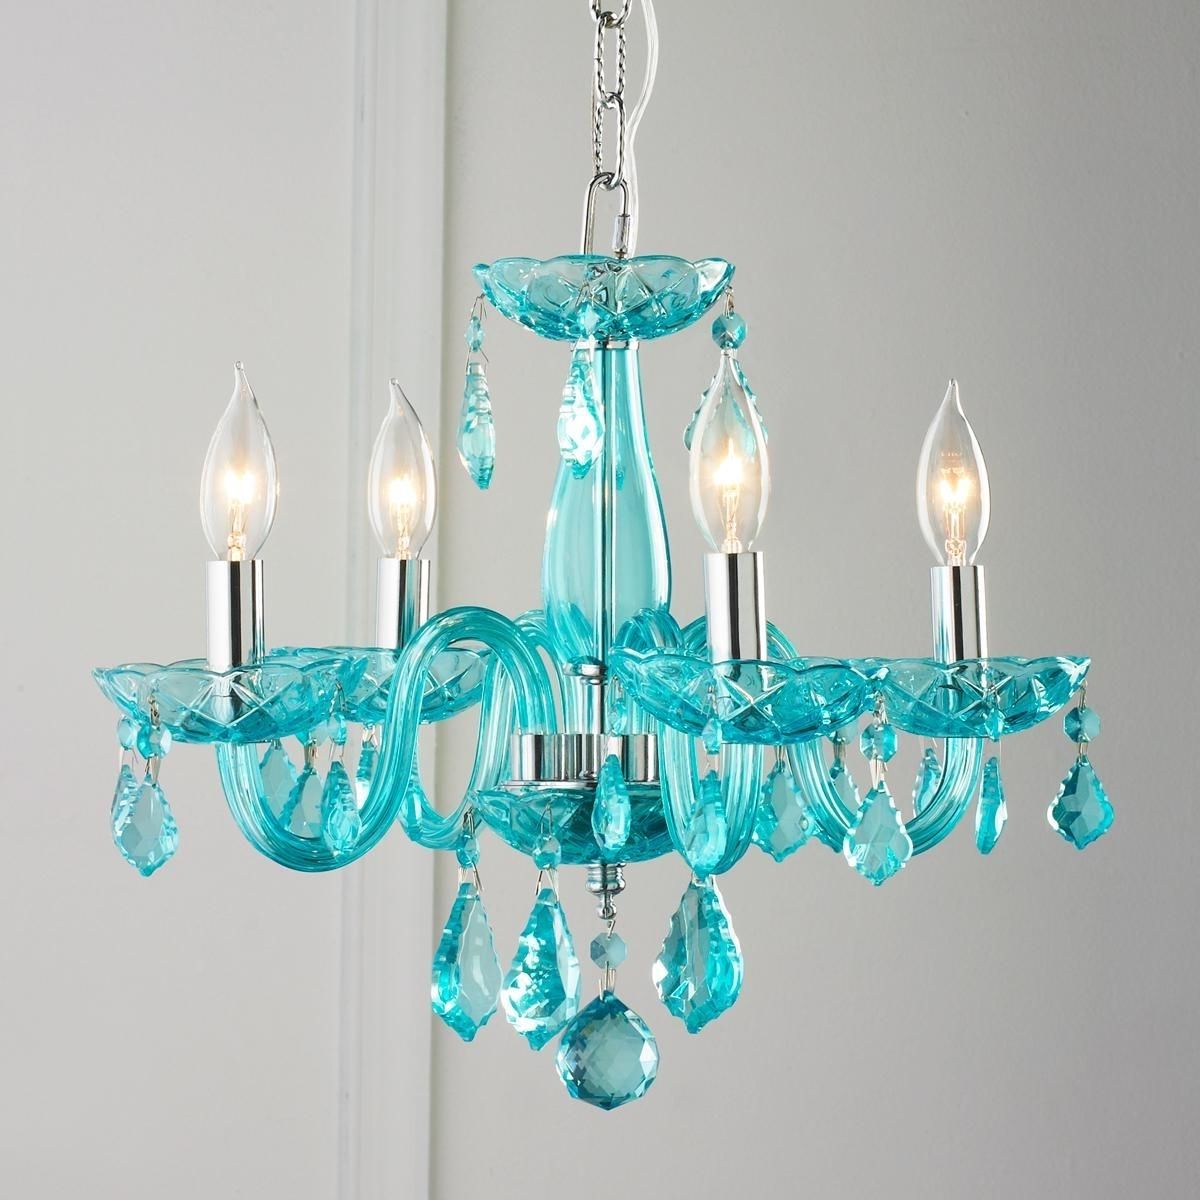 Turquoise Mini Chandeliers For Best And Newest Color Crystal Mini Chandelier (View 1 of 20)